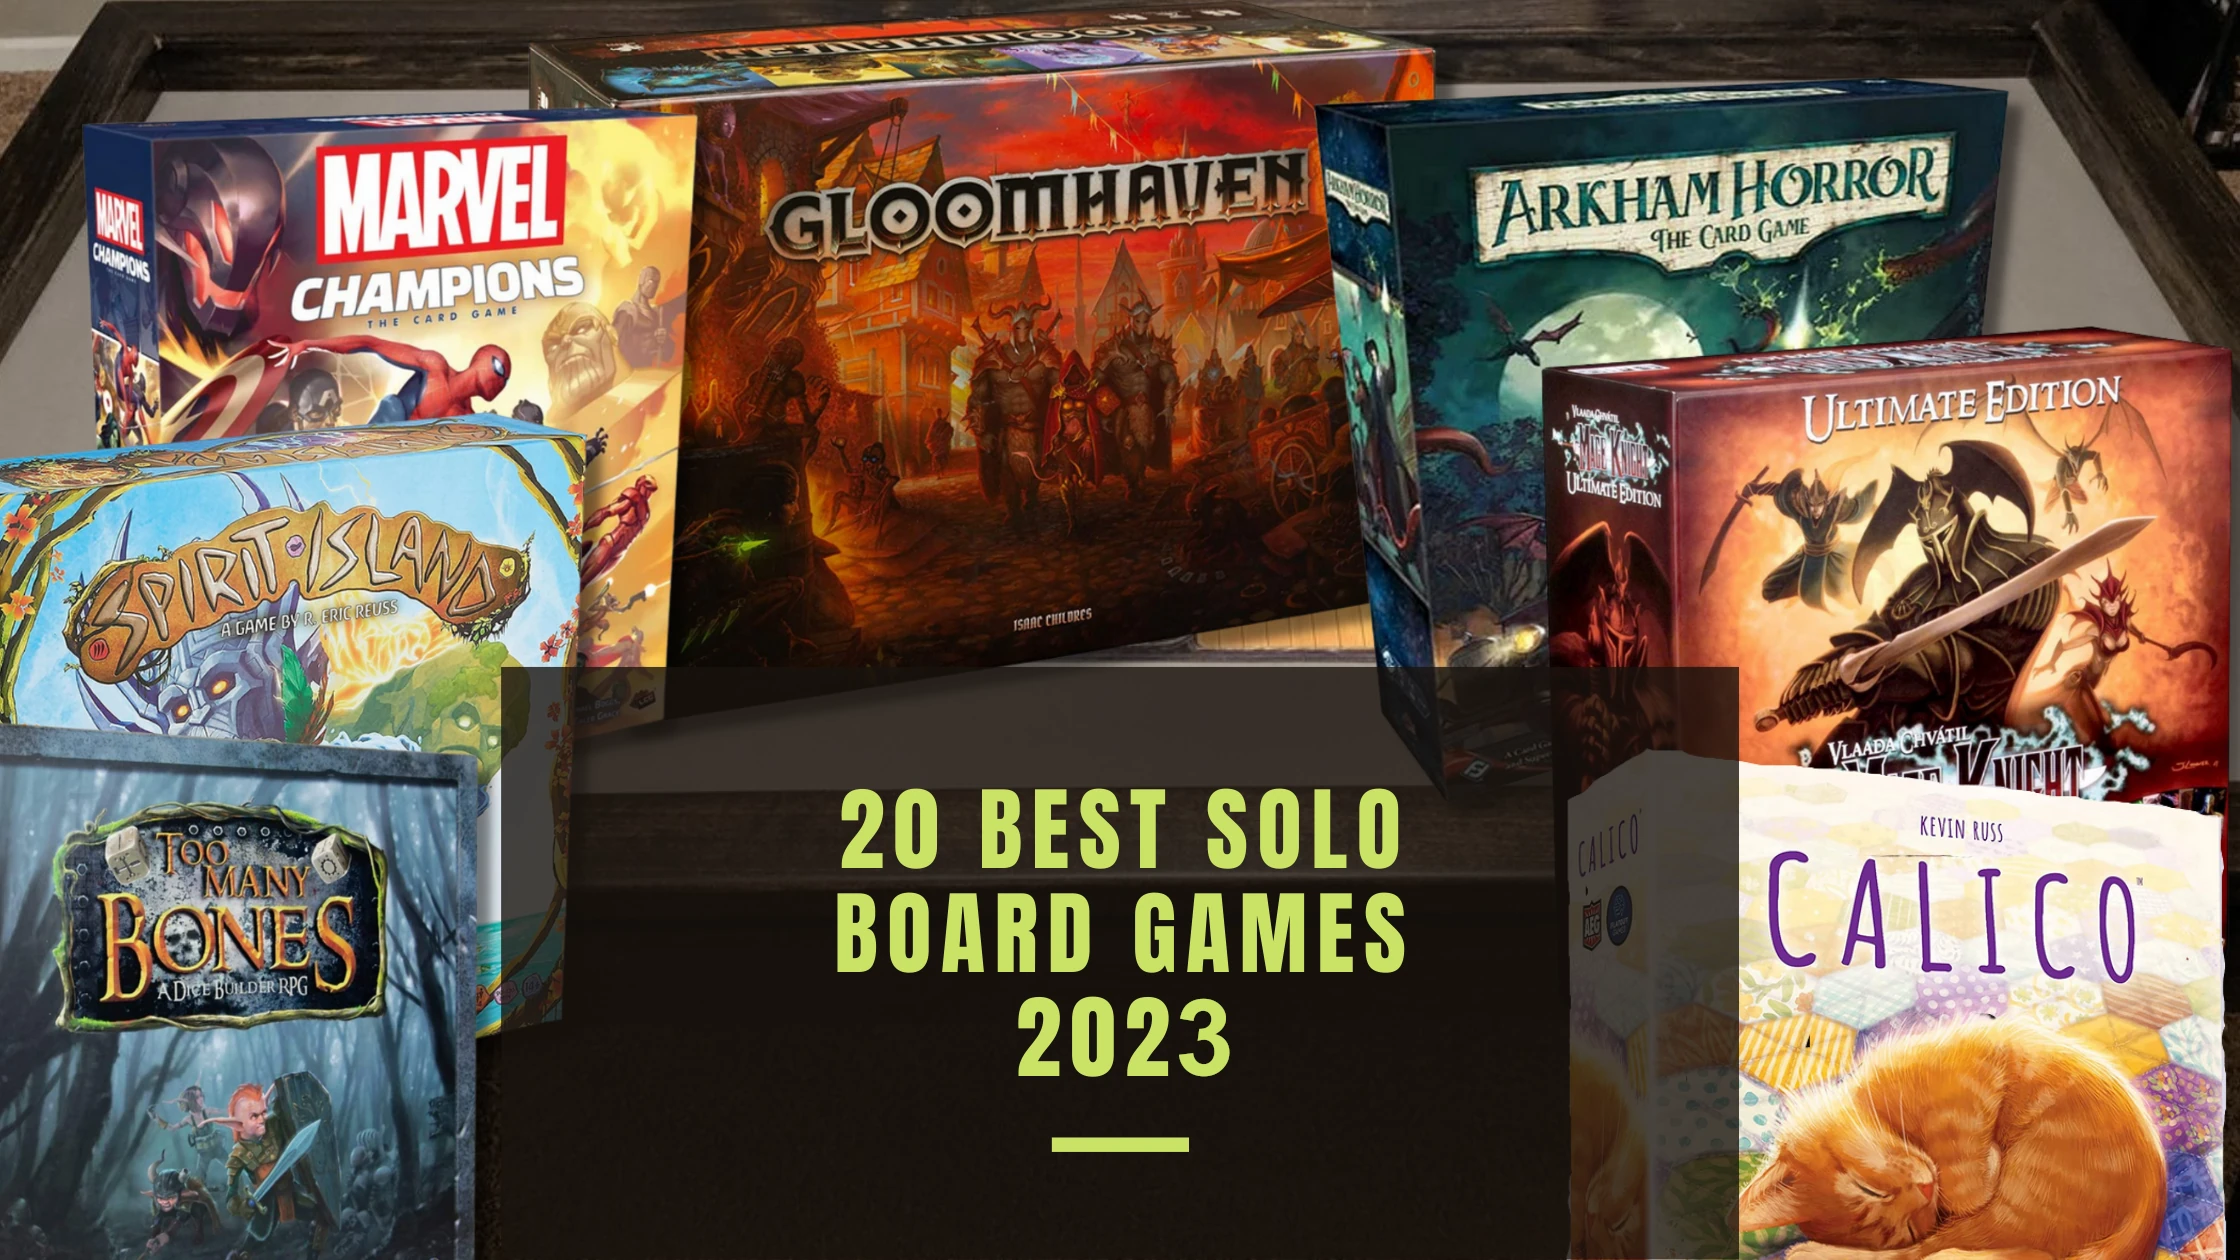 Find Your Next Solo Board Game Obsession: Our Picks for the Best 20 in 2023